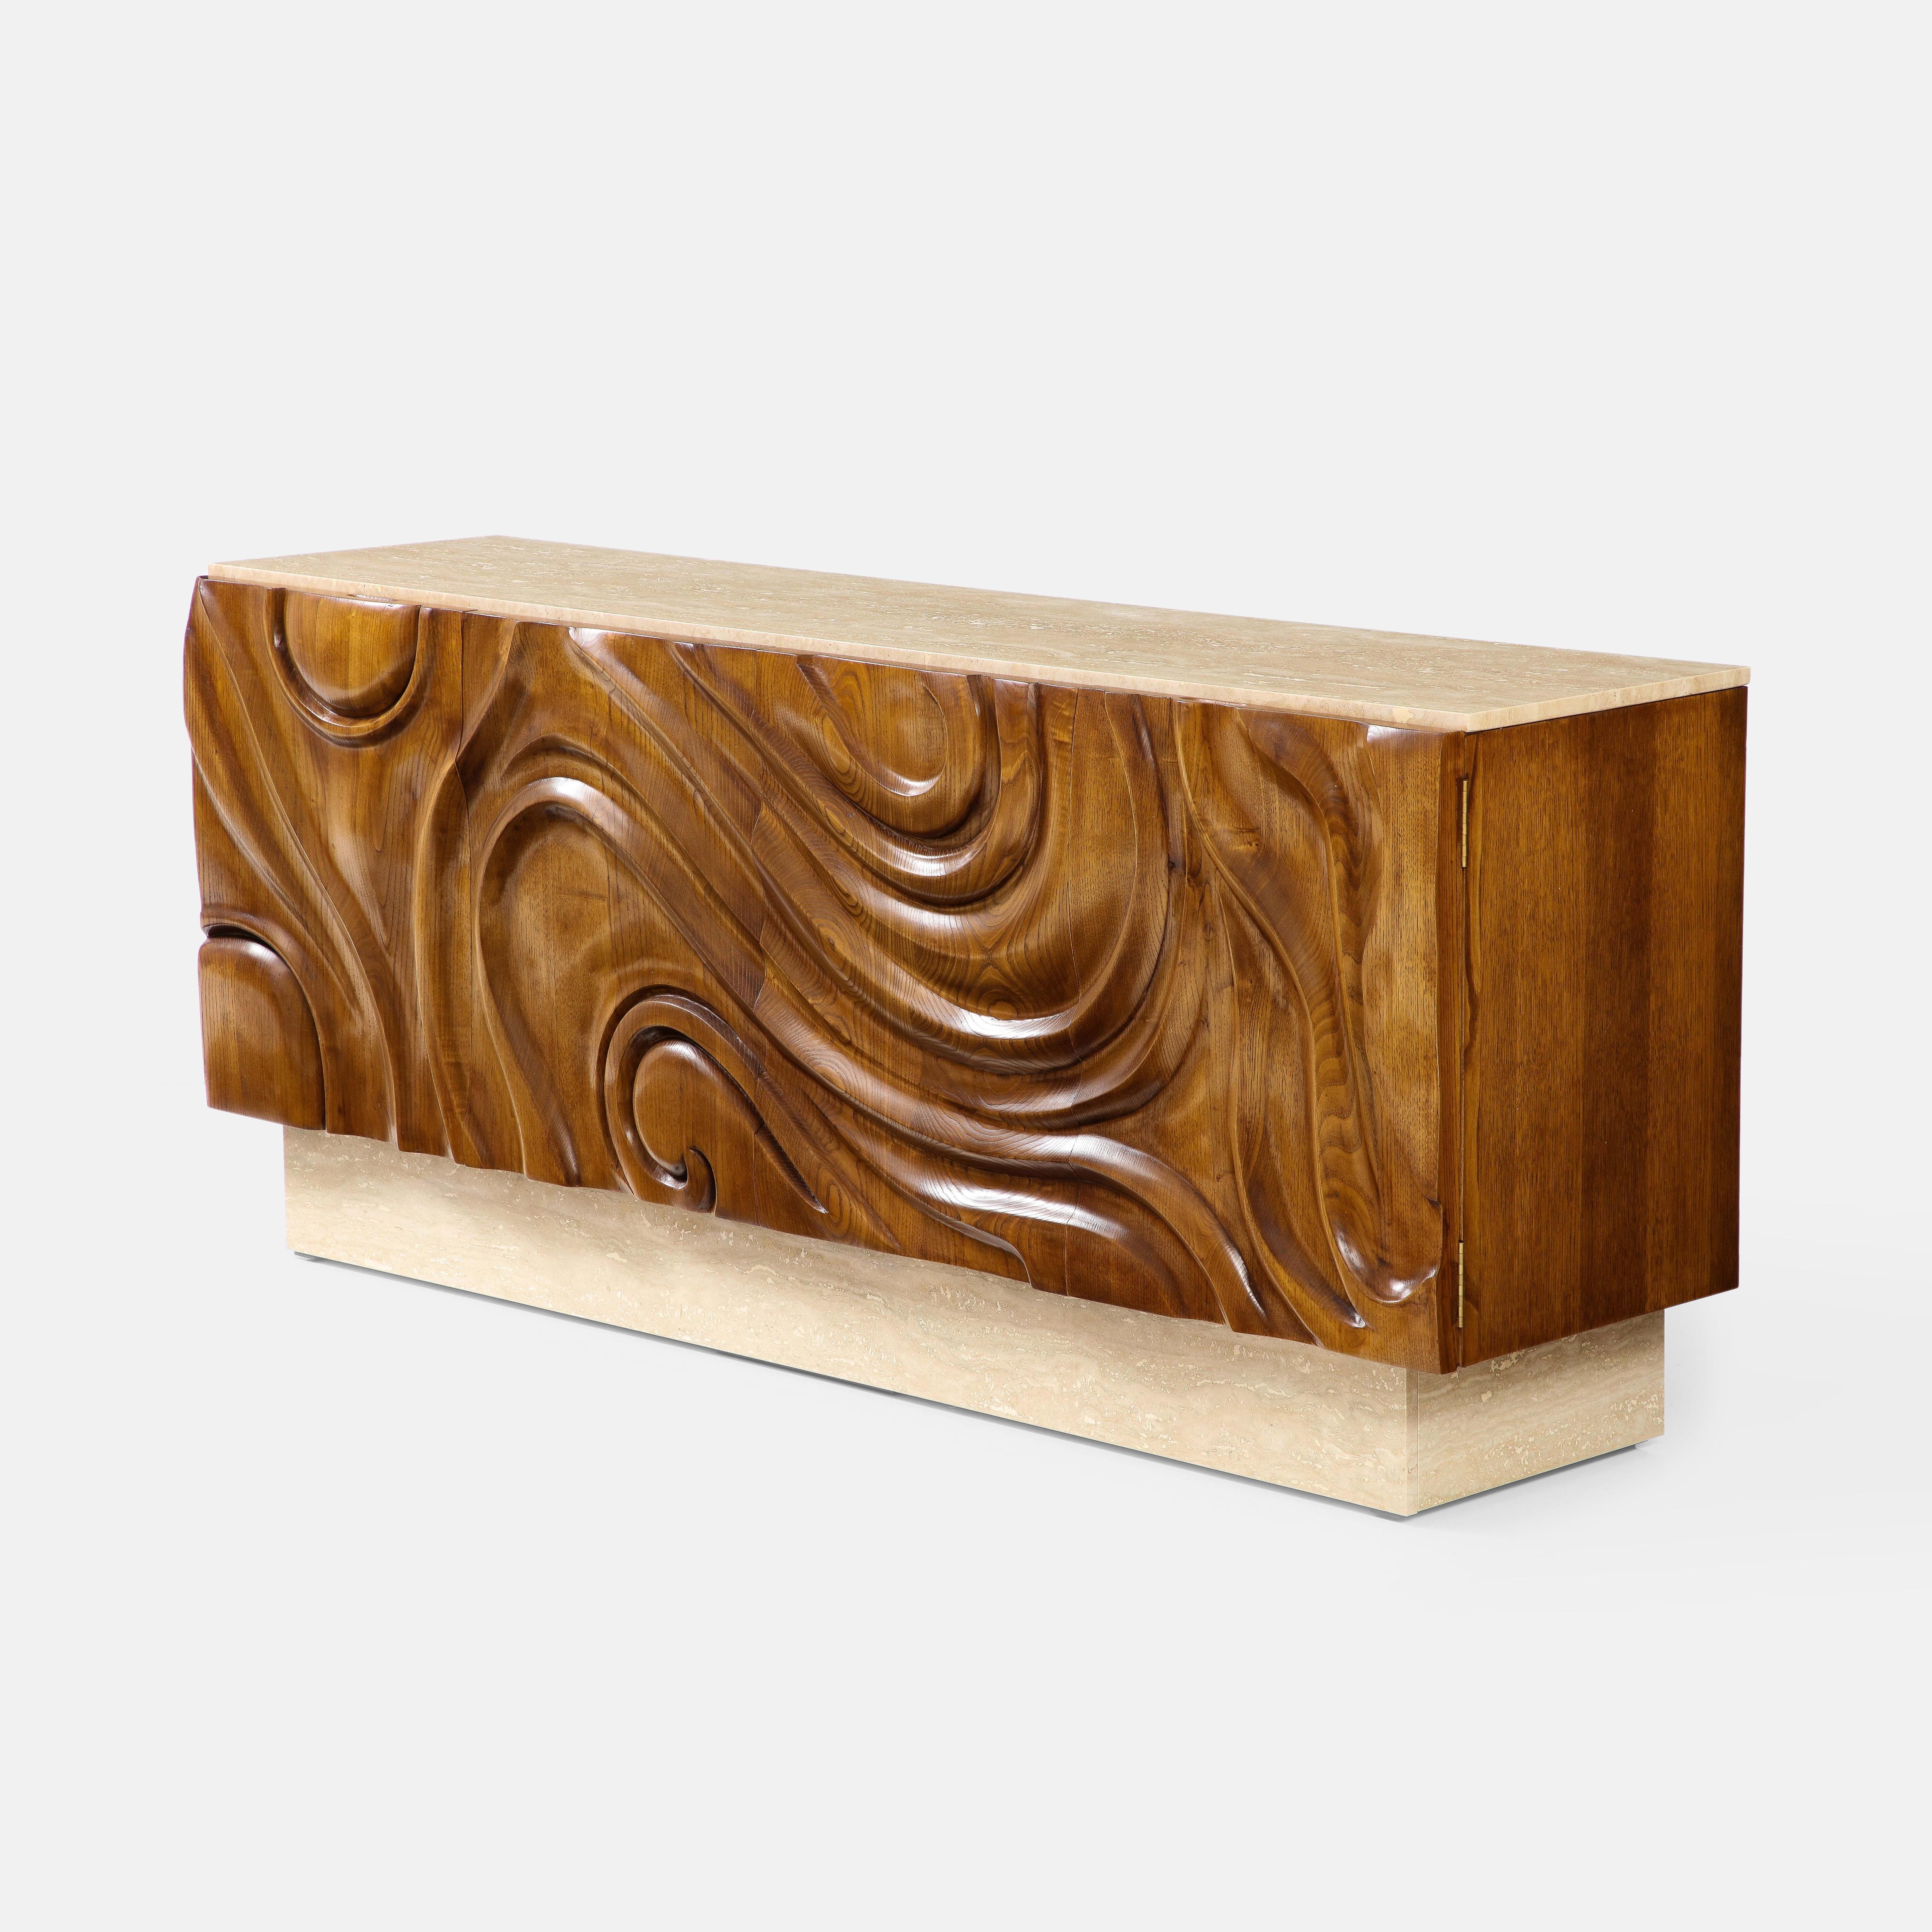 Contemporary Italian artisan four-door carved oak cabinet in the Modernist style with travertine top and plinth.  This exquisite handmade cabinet consists of sculptural hand-carved oak door panels in a stylized organic swirl pattern creating